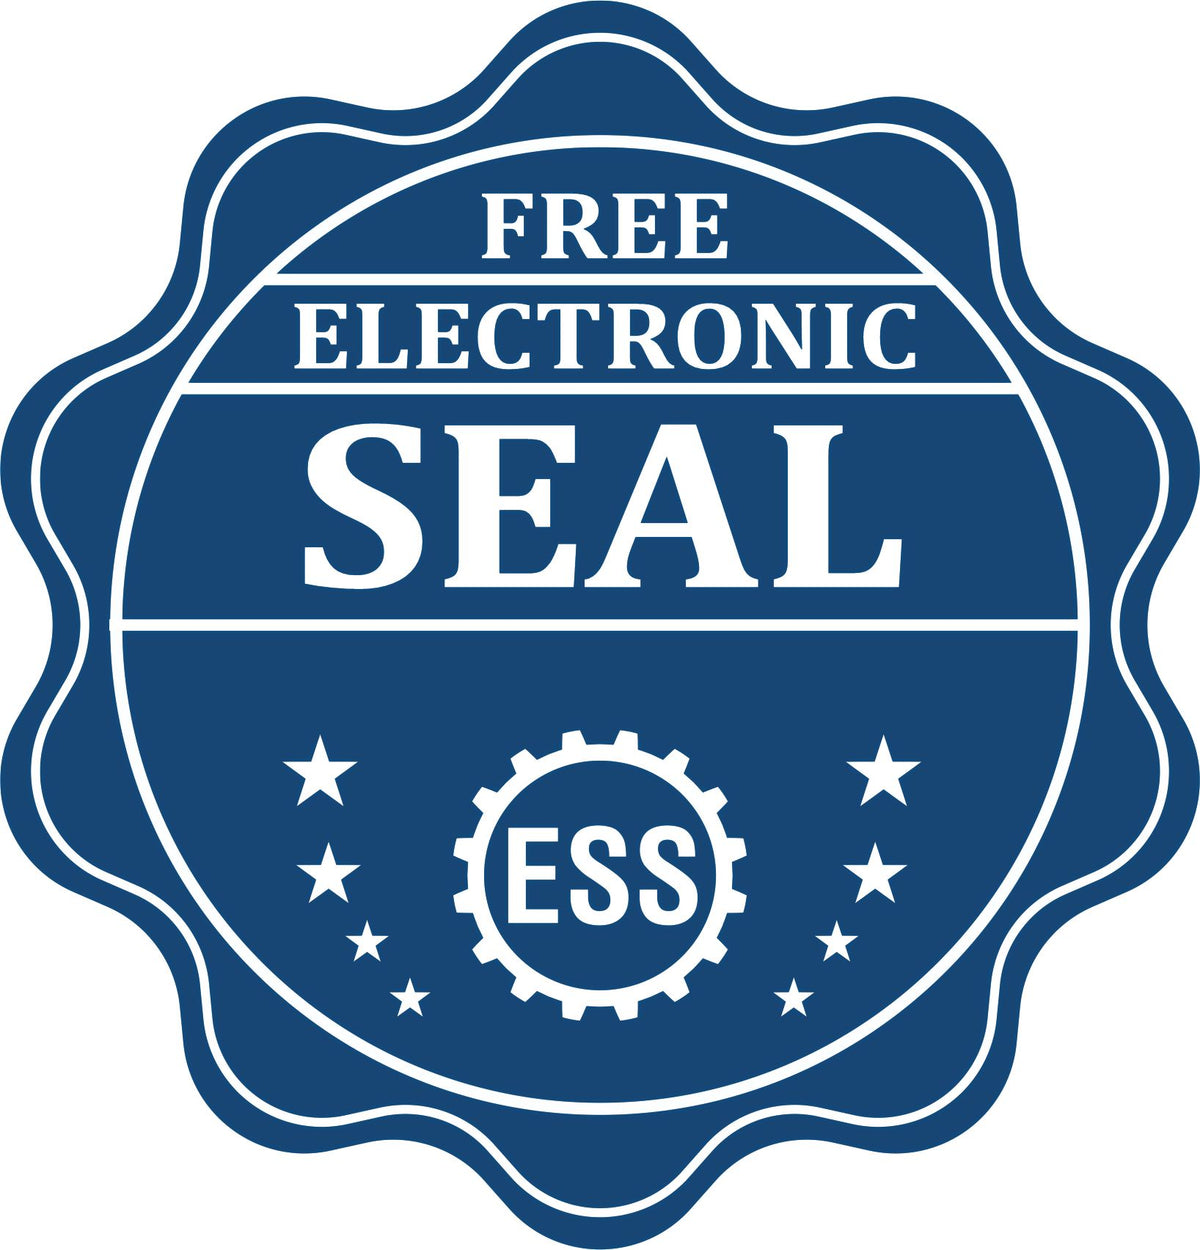 A badge showing a free electronic seal for the Long Reach Alabama Land Surveyor Seal with stars and the ESS gear on the emblem.